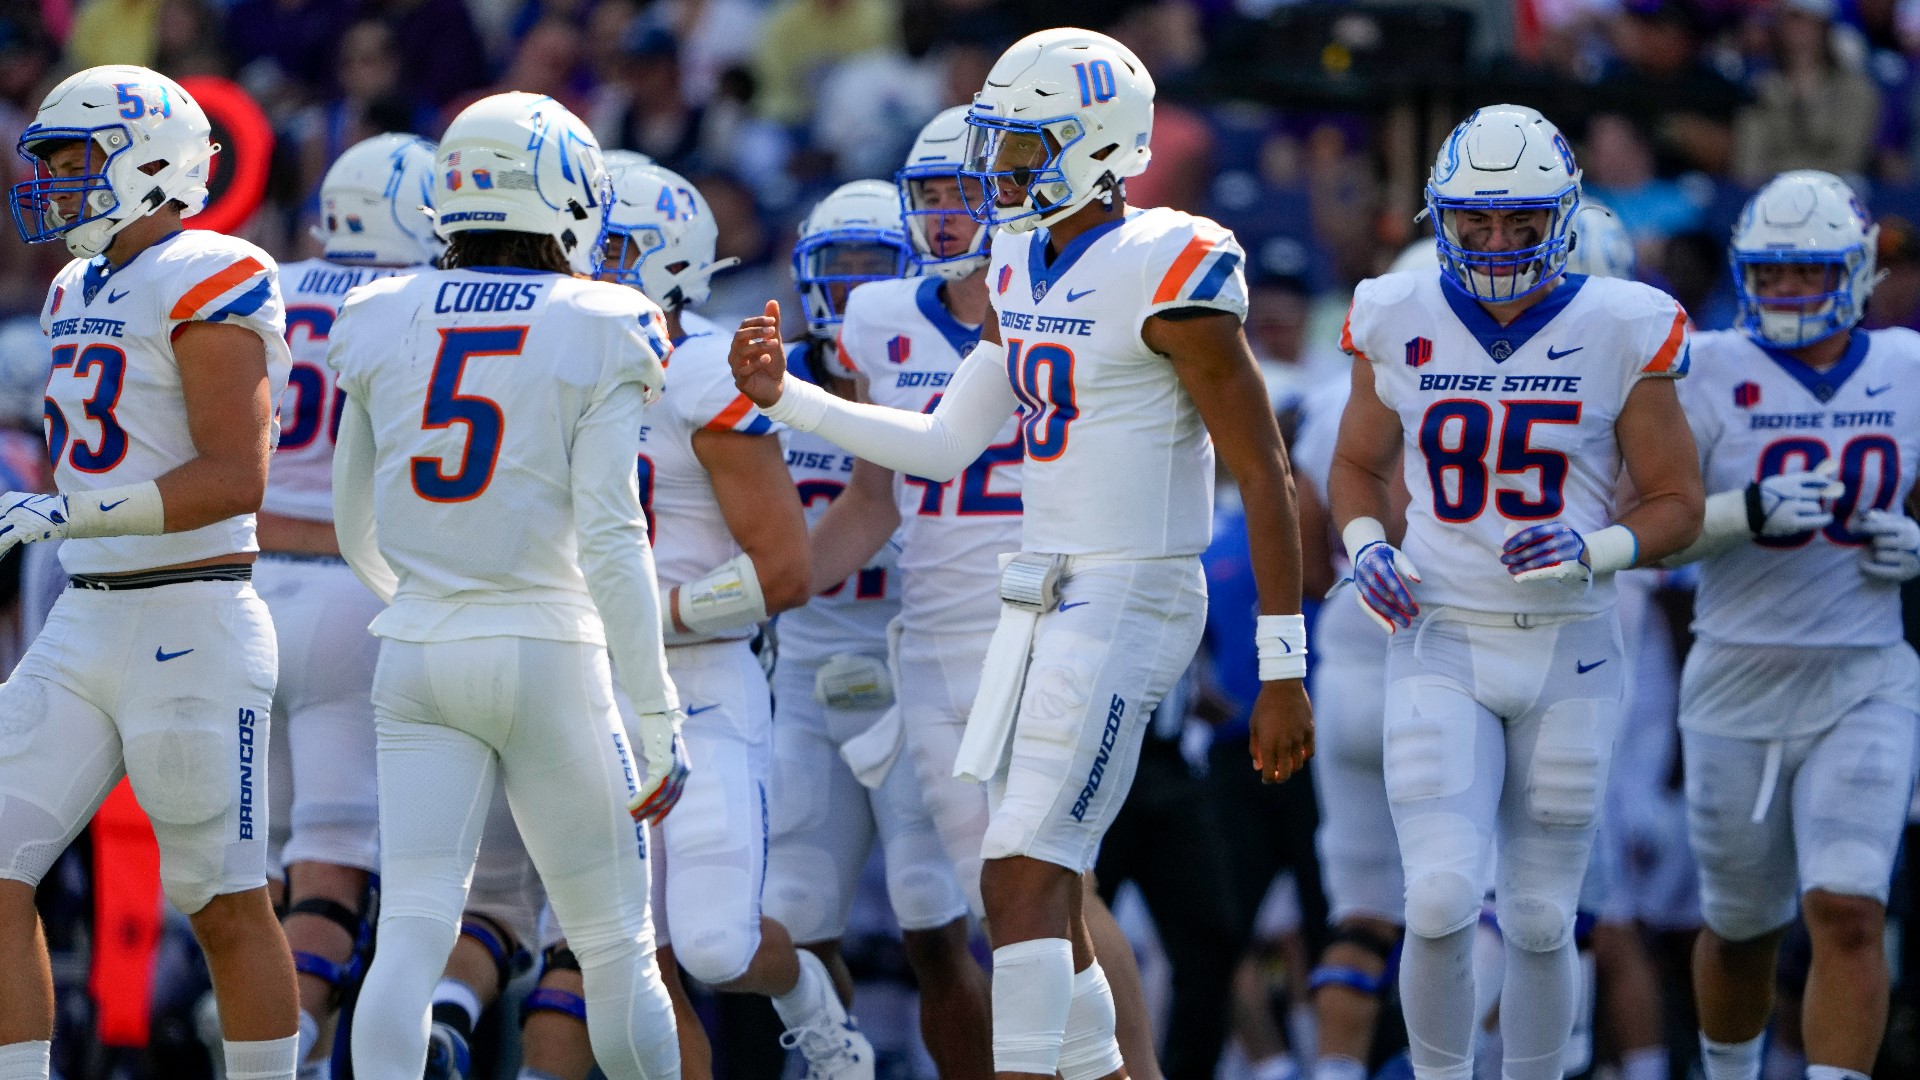 Boise State vs. North Dakota: How to watch, fan guide and preview